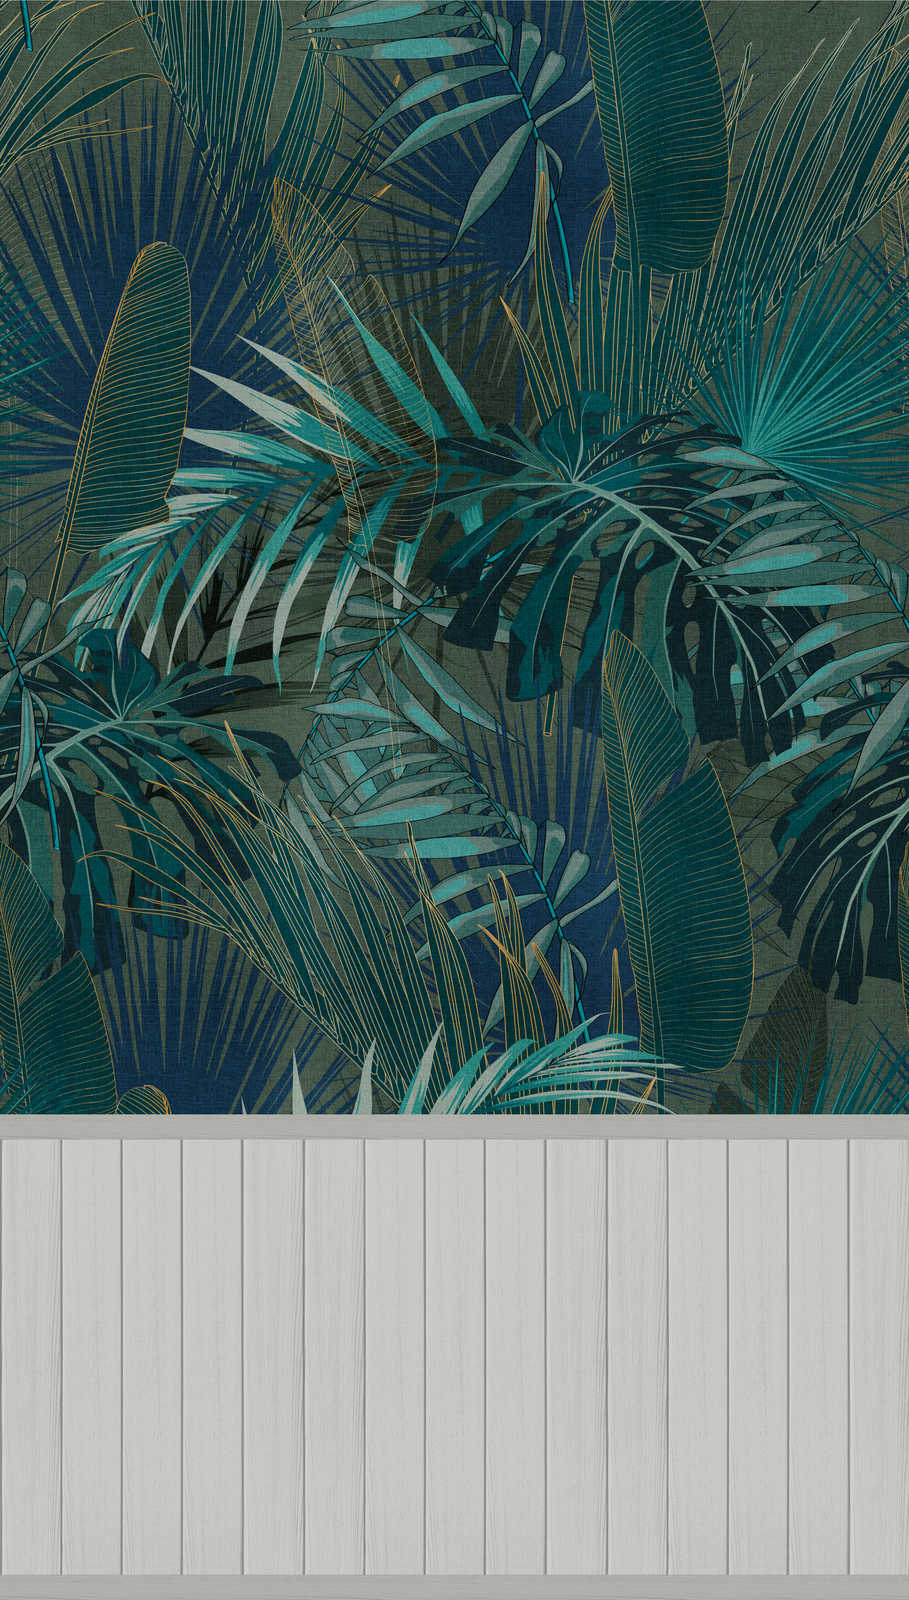             Non-woven motif wallpaper with wood-effect plinth border and jungle pattern - grey, blue, turquoise
        